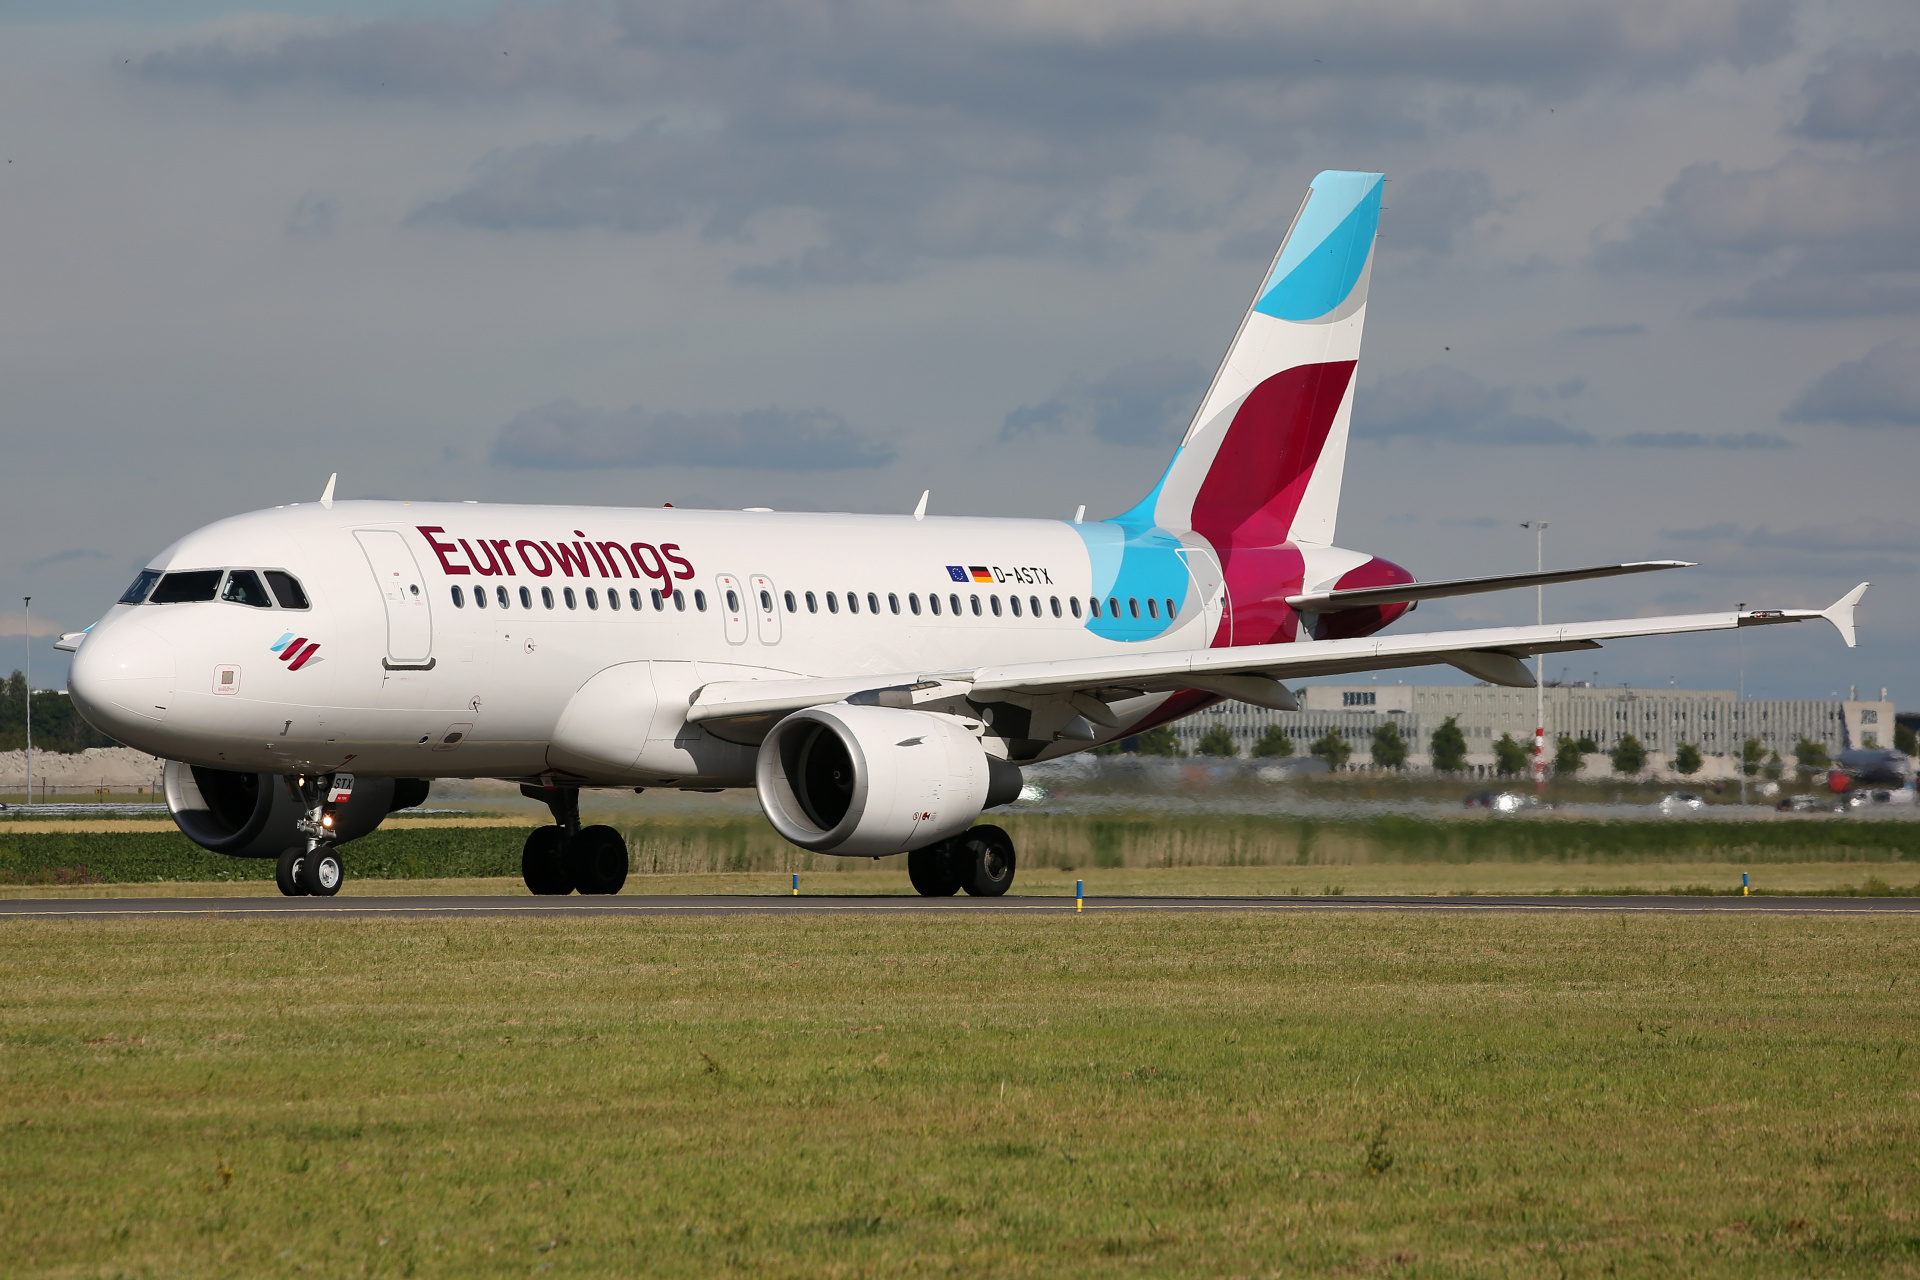 D-ASTX, Eurowings (Samoloty » Spotting na Schiphol » Airbus A319-100)